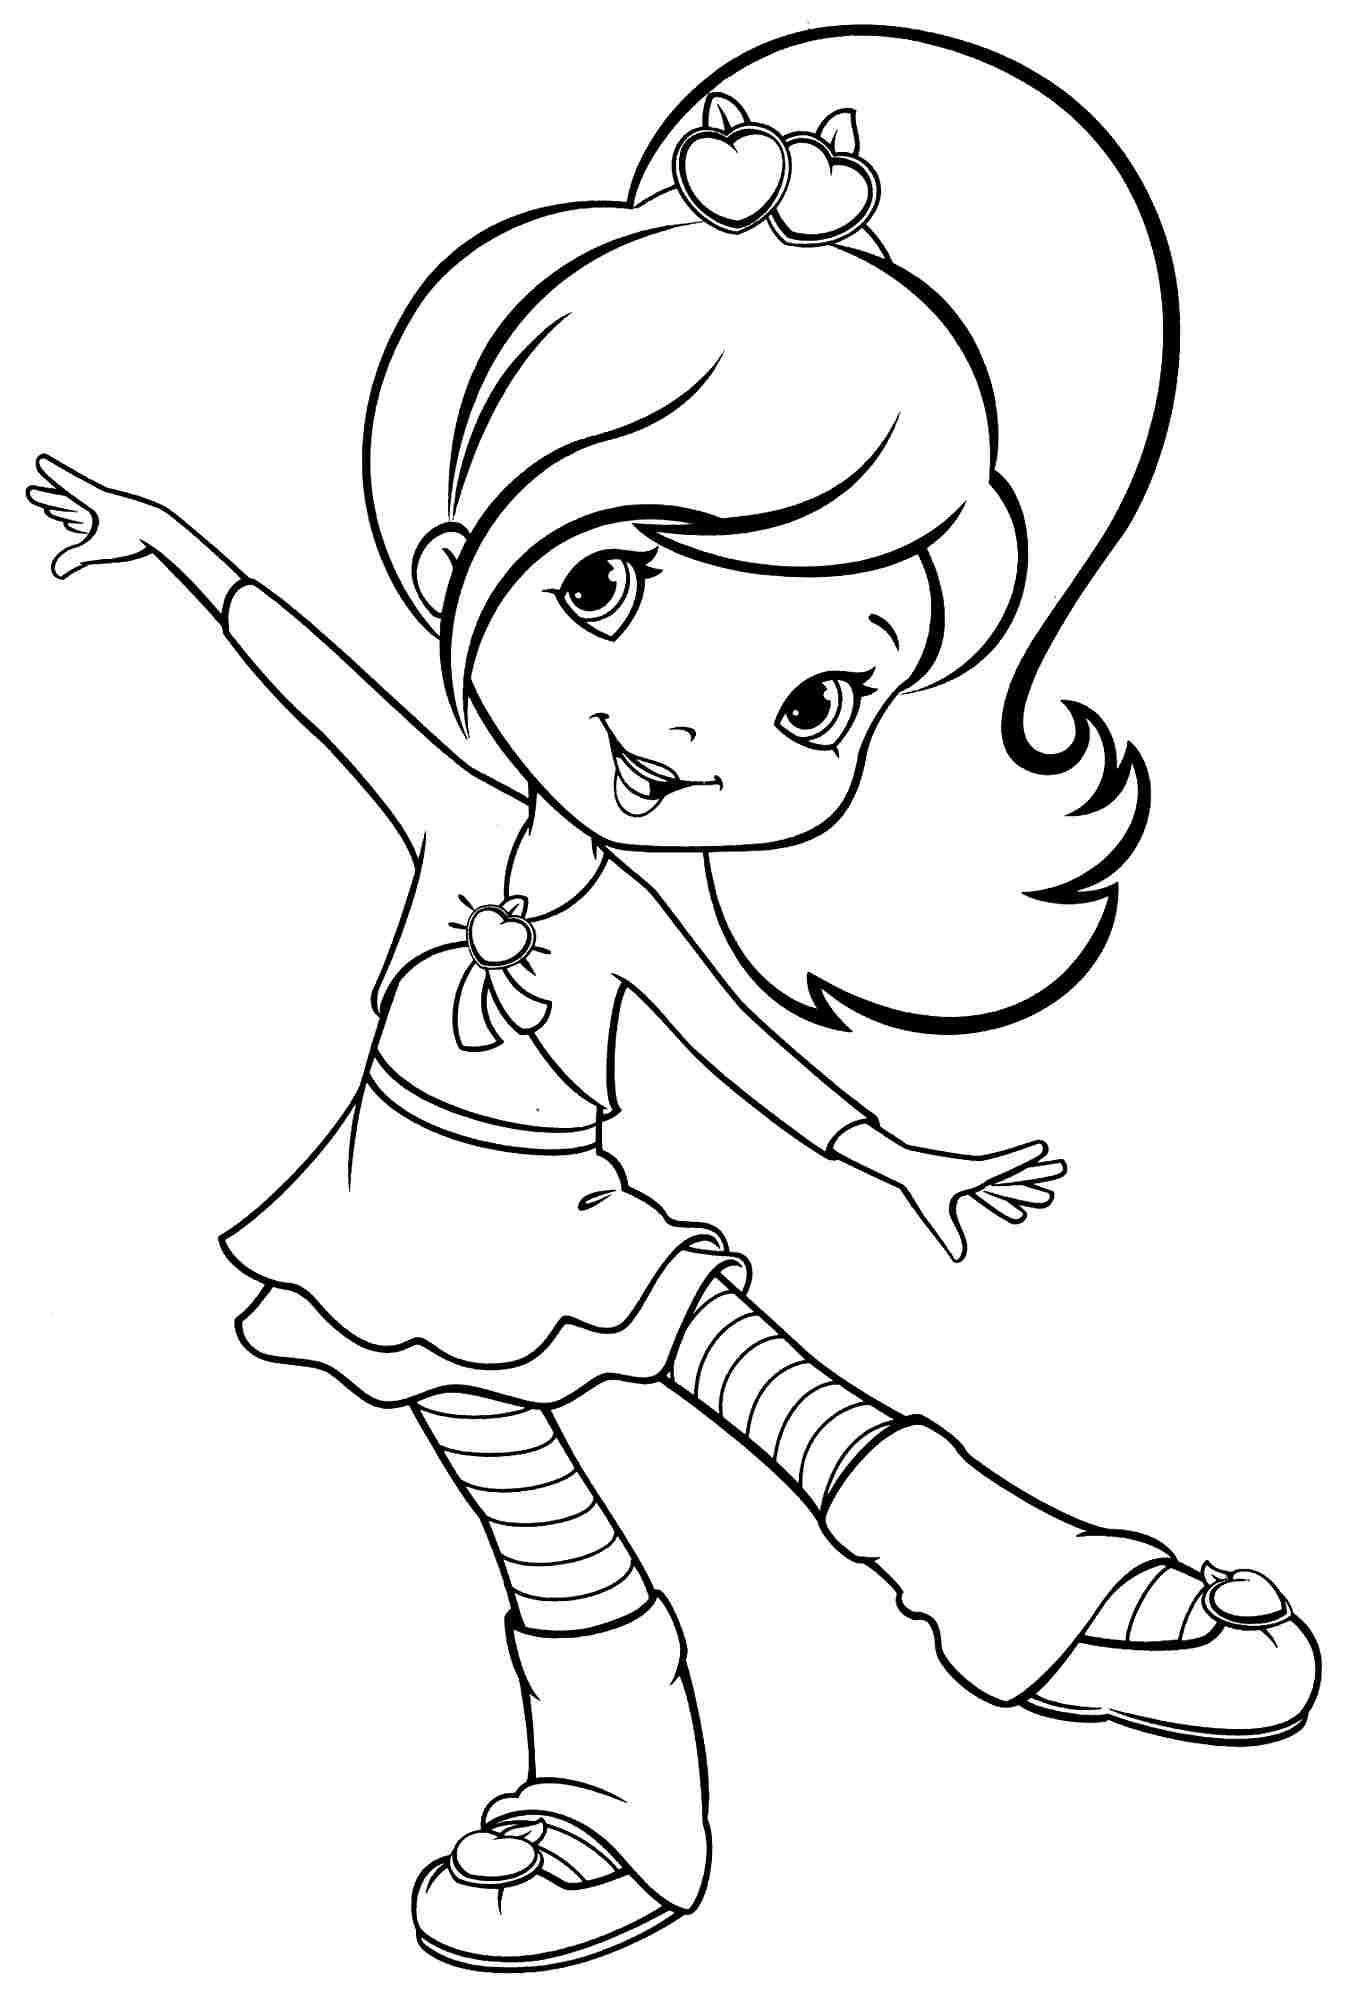 Coloring Sheets For Girls
 Coloring Pages for Girls Best Coloring Pages For Kids